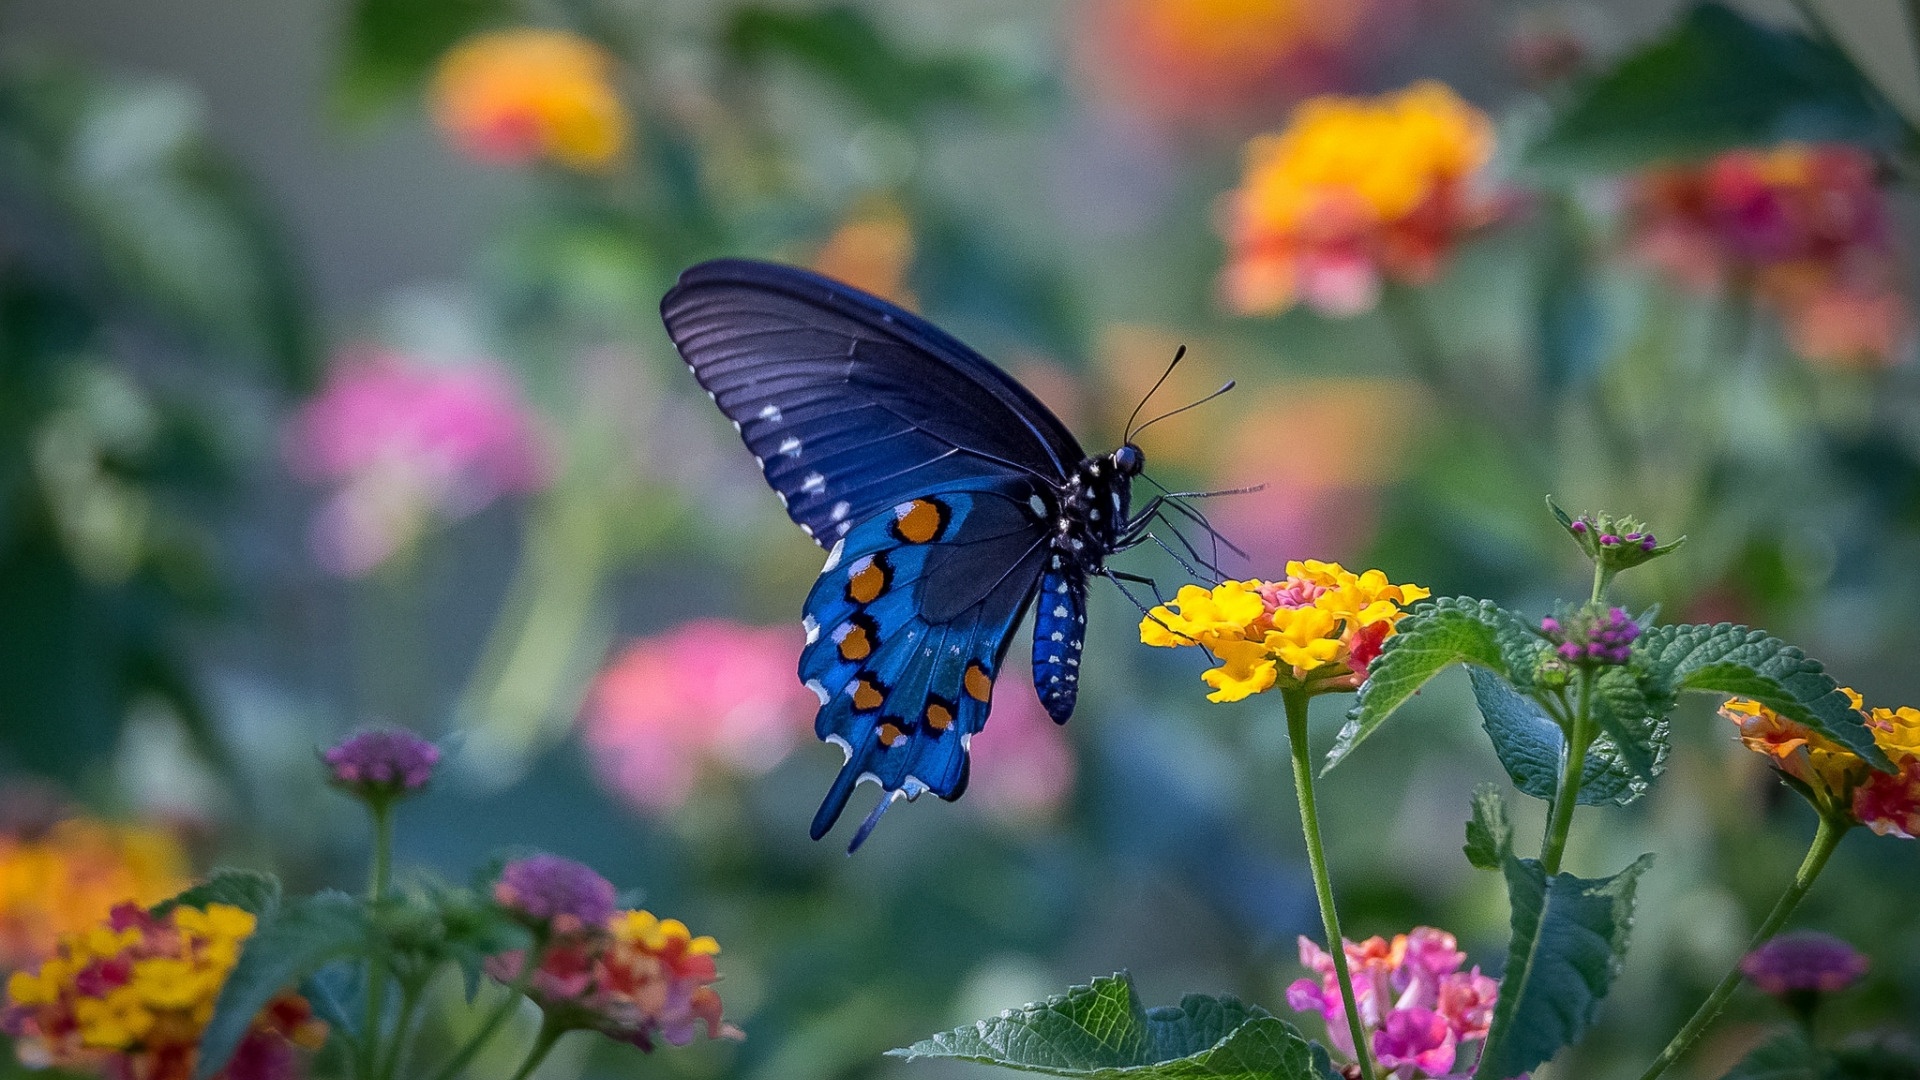 Butterfly On A Flower Pic